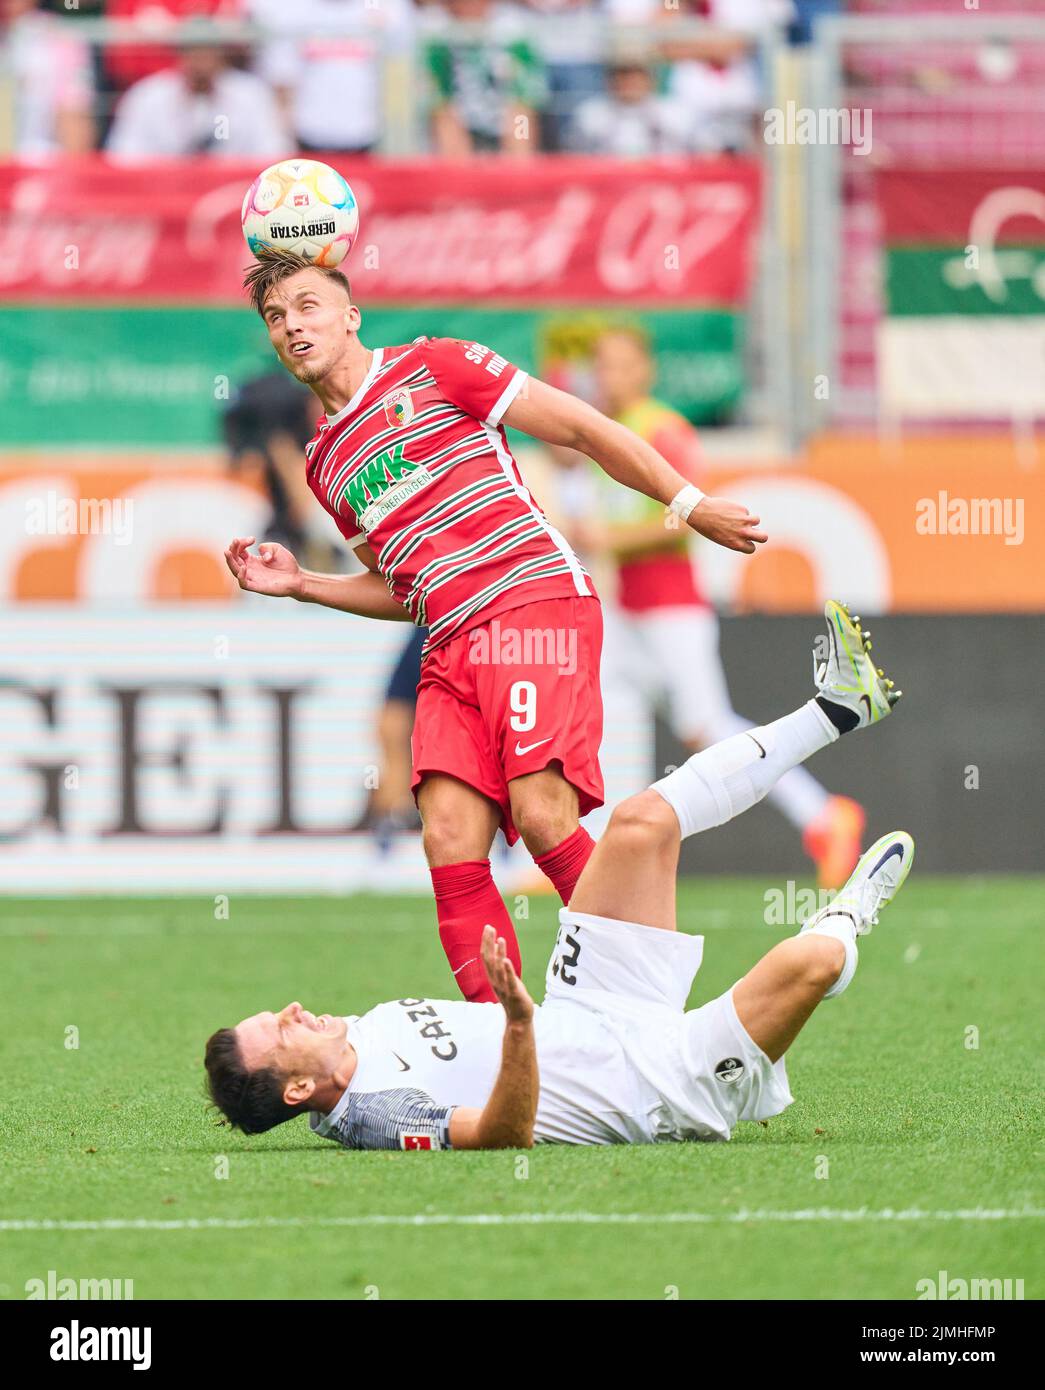 Ermedin Demirovic, FCA 9  compete for the ball, tackling, duel, header, zweikampf, action, fight against Michael Gregoritsch, FRG 38  in the match FC AUGSBURG - SC FREIBURG 0-4 1.German Football League on Aug 06, 2022 in Augsburg, Germany. Season 2022/2023, matchday 1, 1.Bundesliga, FCB, Munich, 1.Spieltag © Peter Schatz / Alamy Live News    - DFL REGULATIONS PROHIBIT ANY USE OF PHOTOGRAPHS as IMAGE SEQUENCES and/or QUASI-VIDEO - Stock Photo